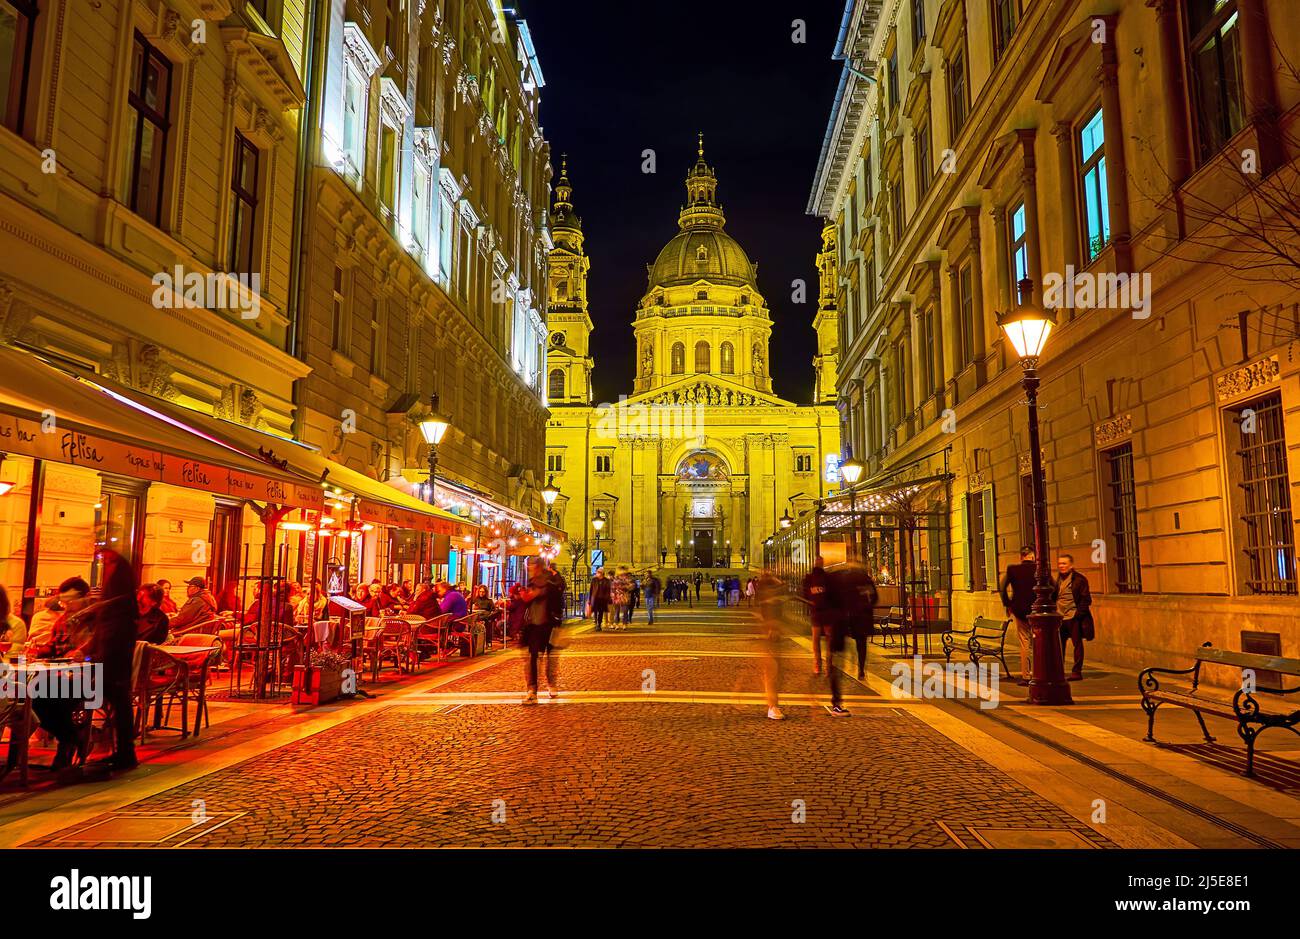 BUDAPEST, HUNGARY - FEB 20, 2022: The view of brightly illuminated St Stephen's Cathedral from pedestrian tourist Zrinyi Street, on Feb 20 in Budapest Stock Photo